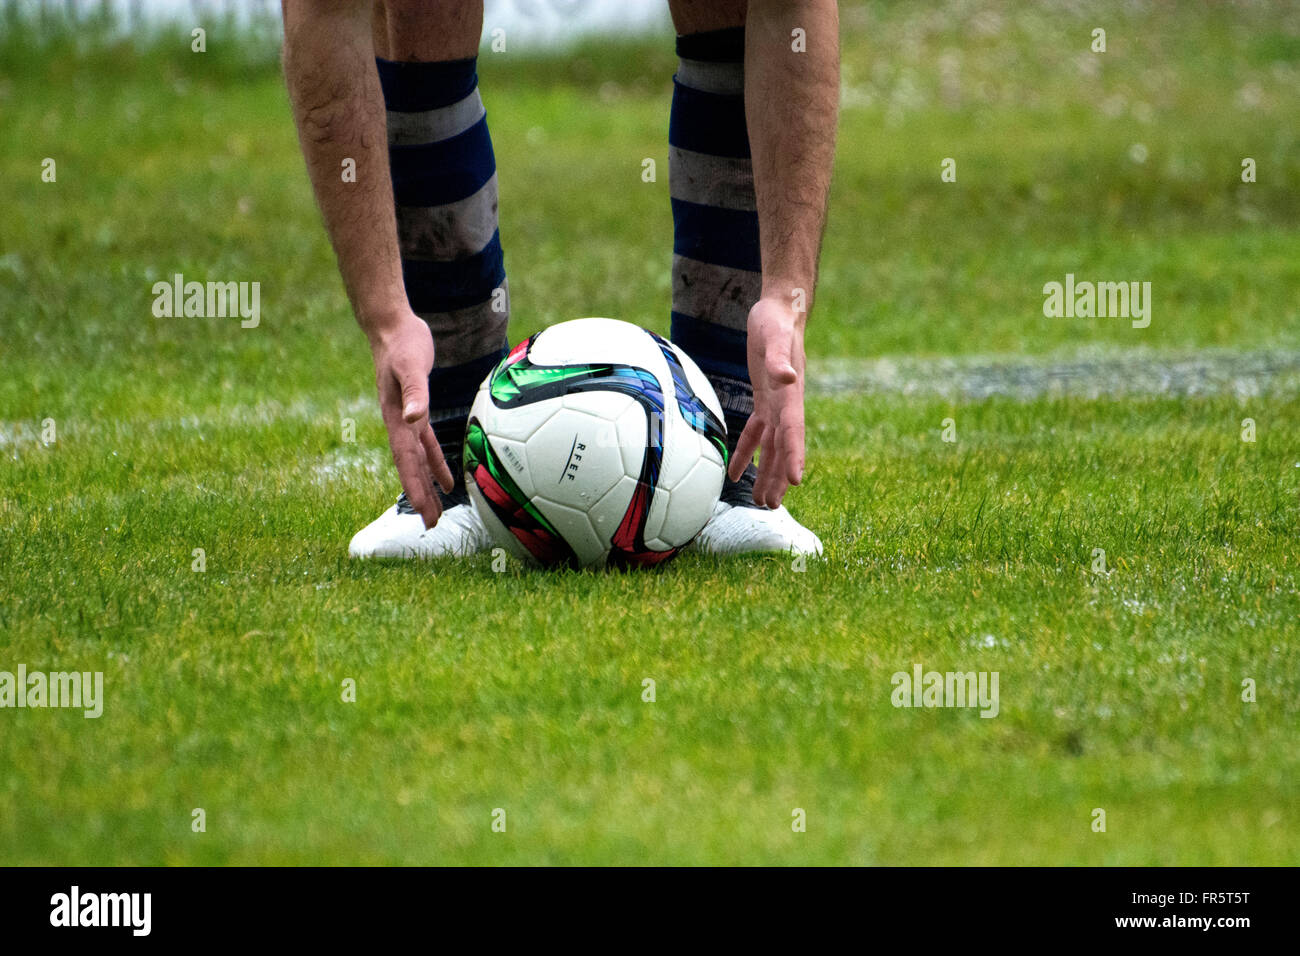 Aviles, Spain. 20th March, 2016. The ball during football match of Spanish League 3rd Division between Real Aviles CF and Union Popular de Langreo at Suarez Puerta Stadium on March 20, 2016 in Aviles, Spain. Credit:  David Gato/Alamy Live News Stock Photo